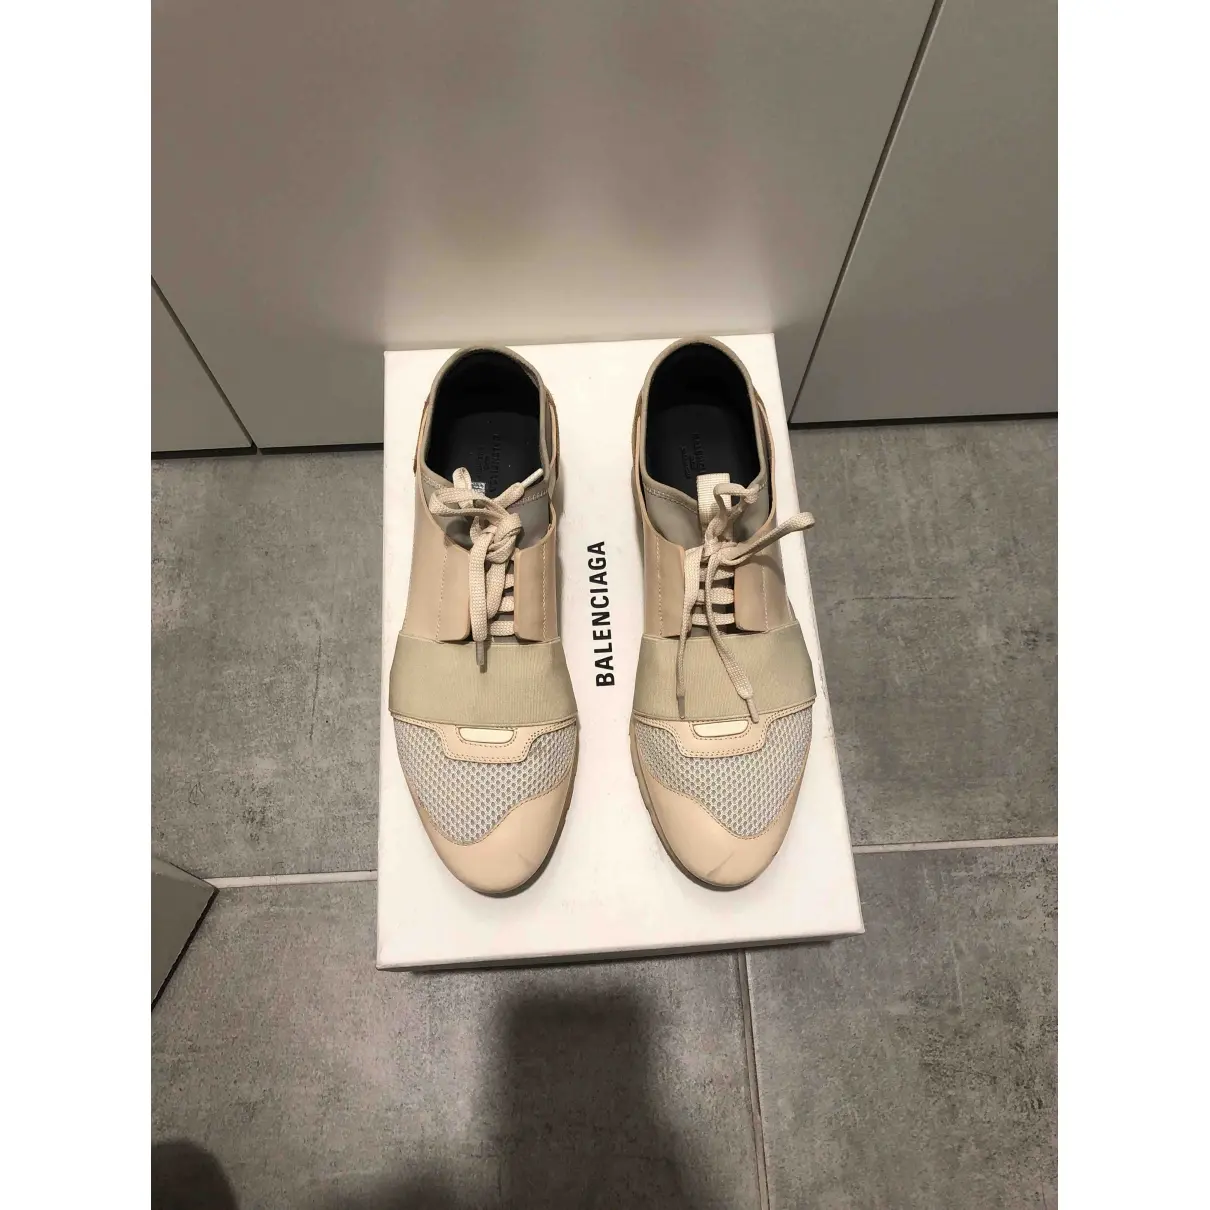 Balenciaga Race leather trainers for sale